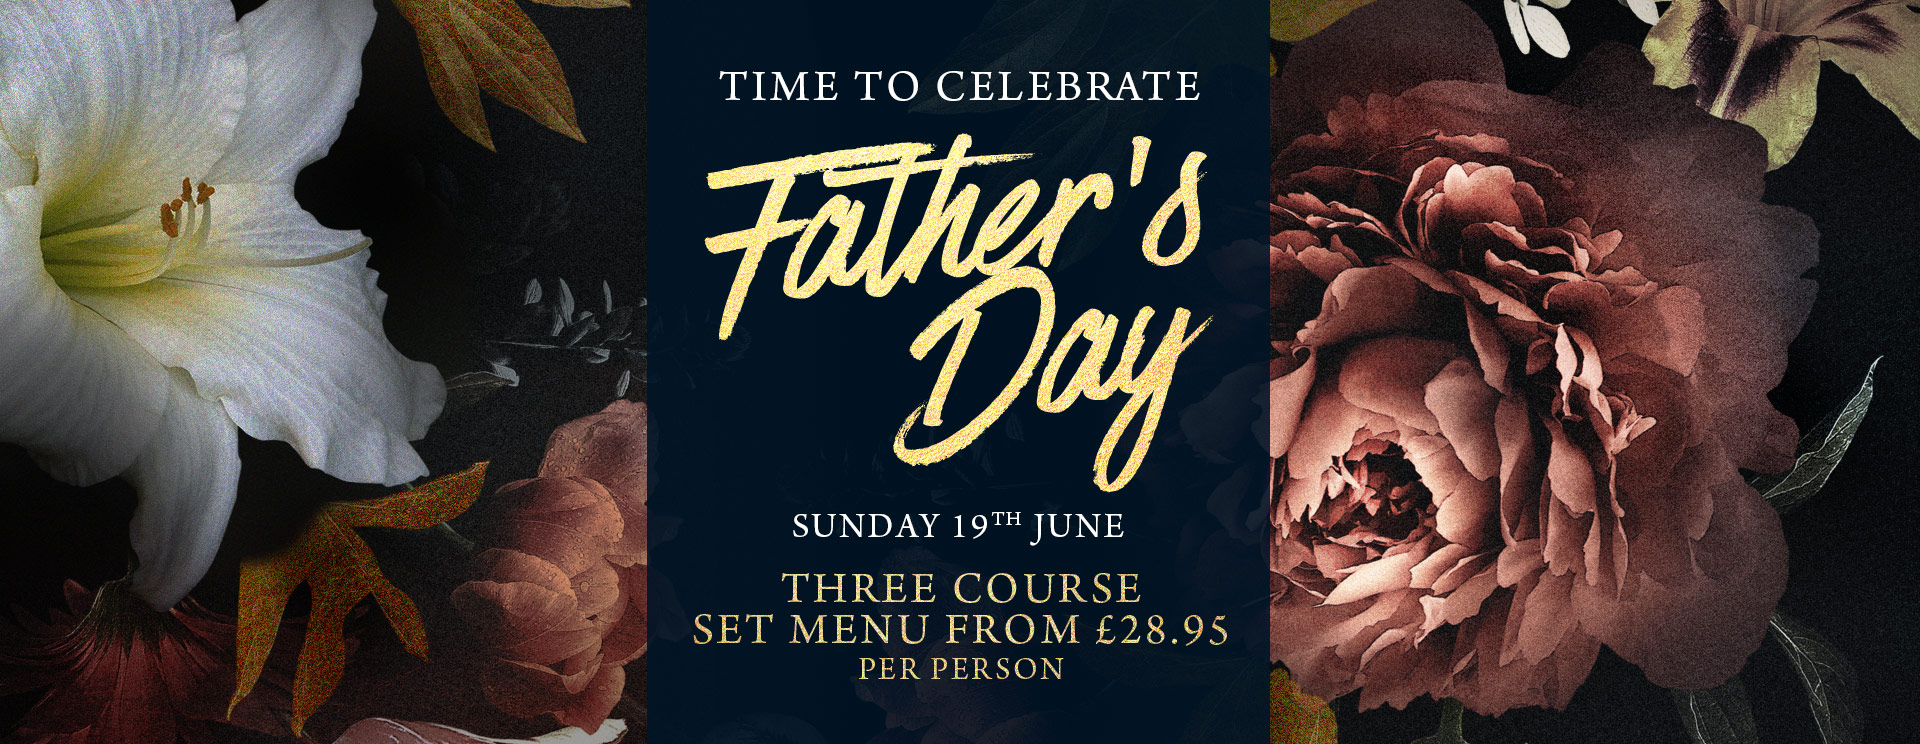 Fathers Day at The Lyttelton Arms